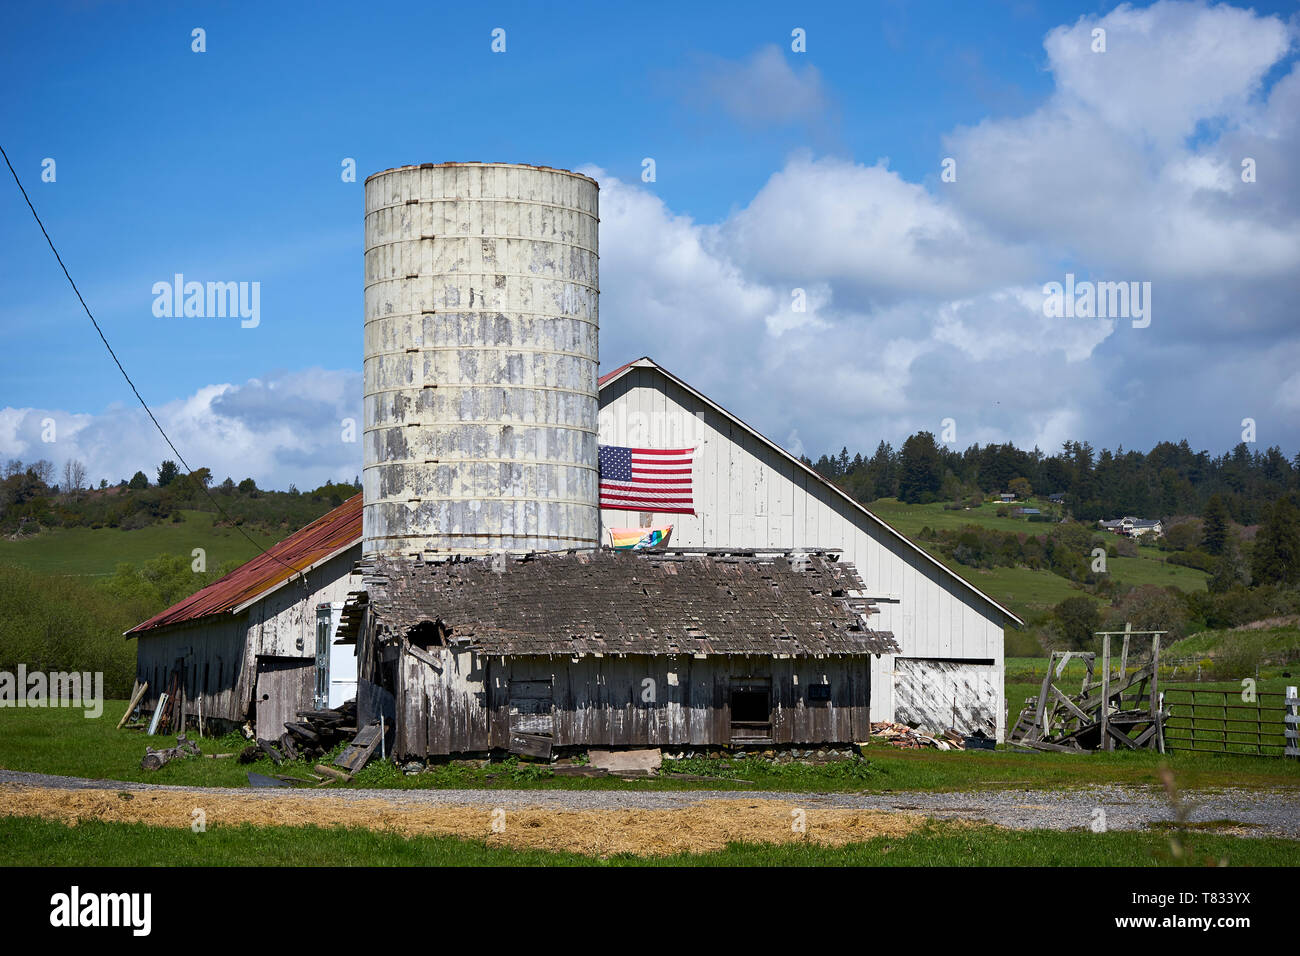 Barn with American flag on a country estate in rural Freestone, Sonoma County, California. Stock Photo